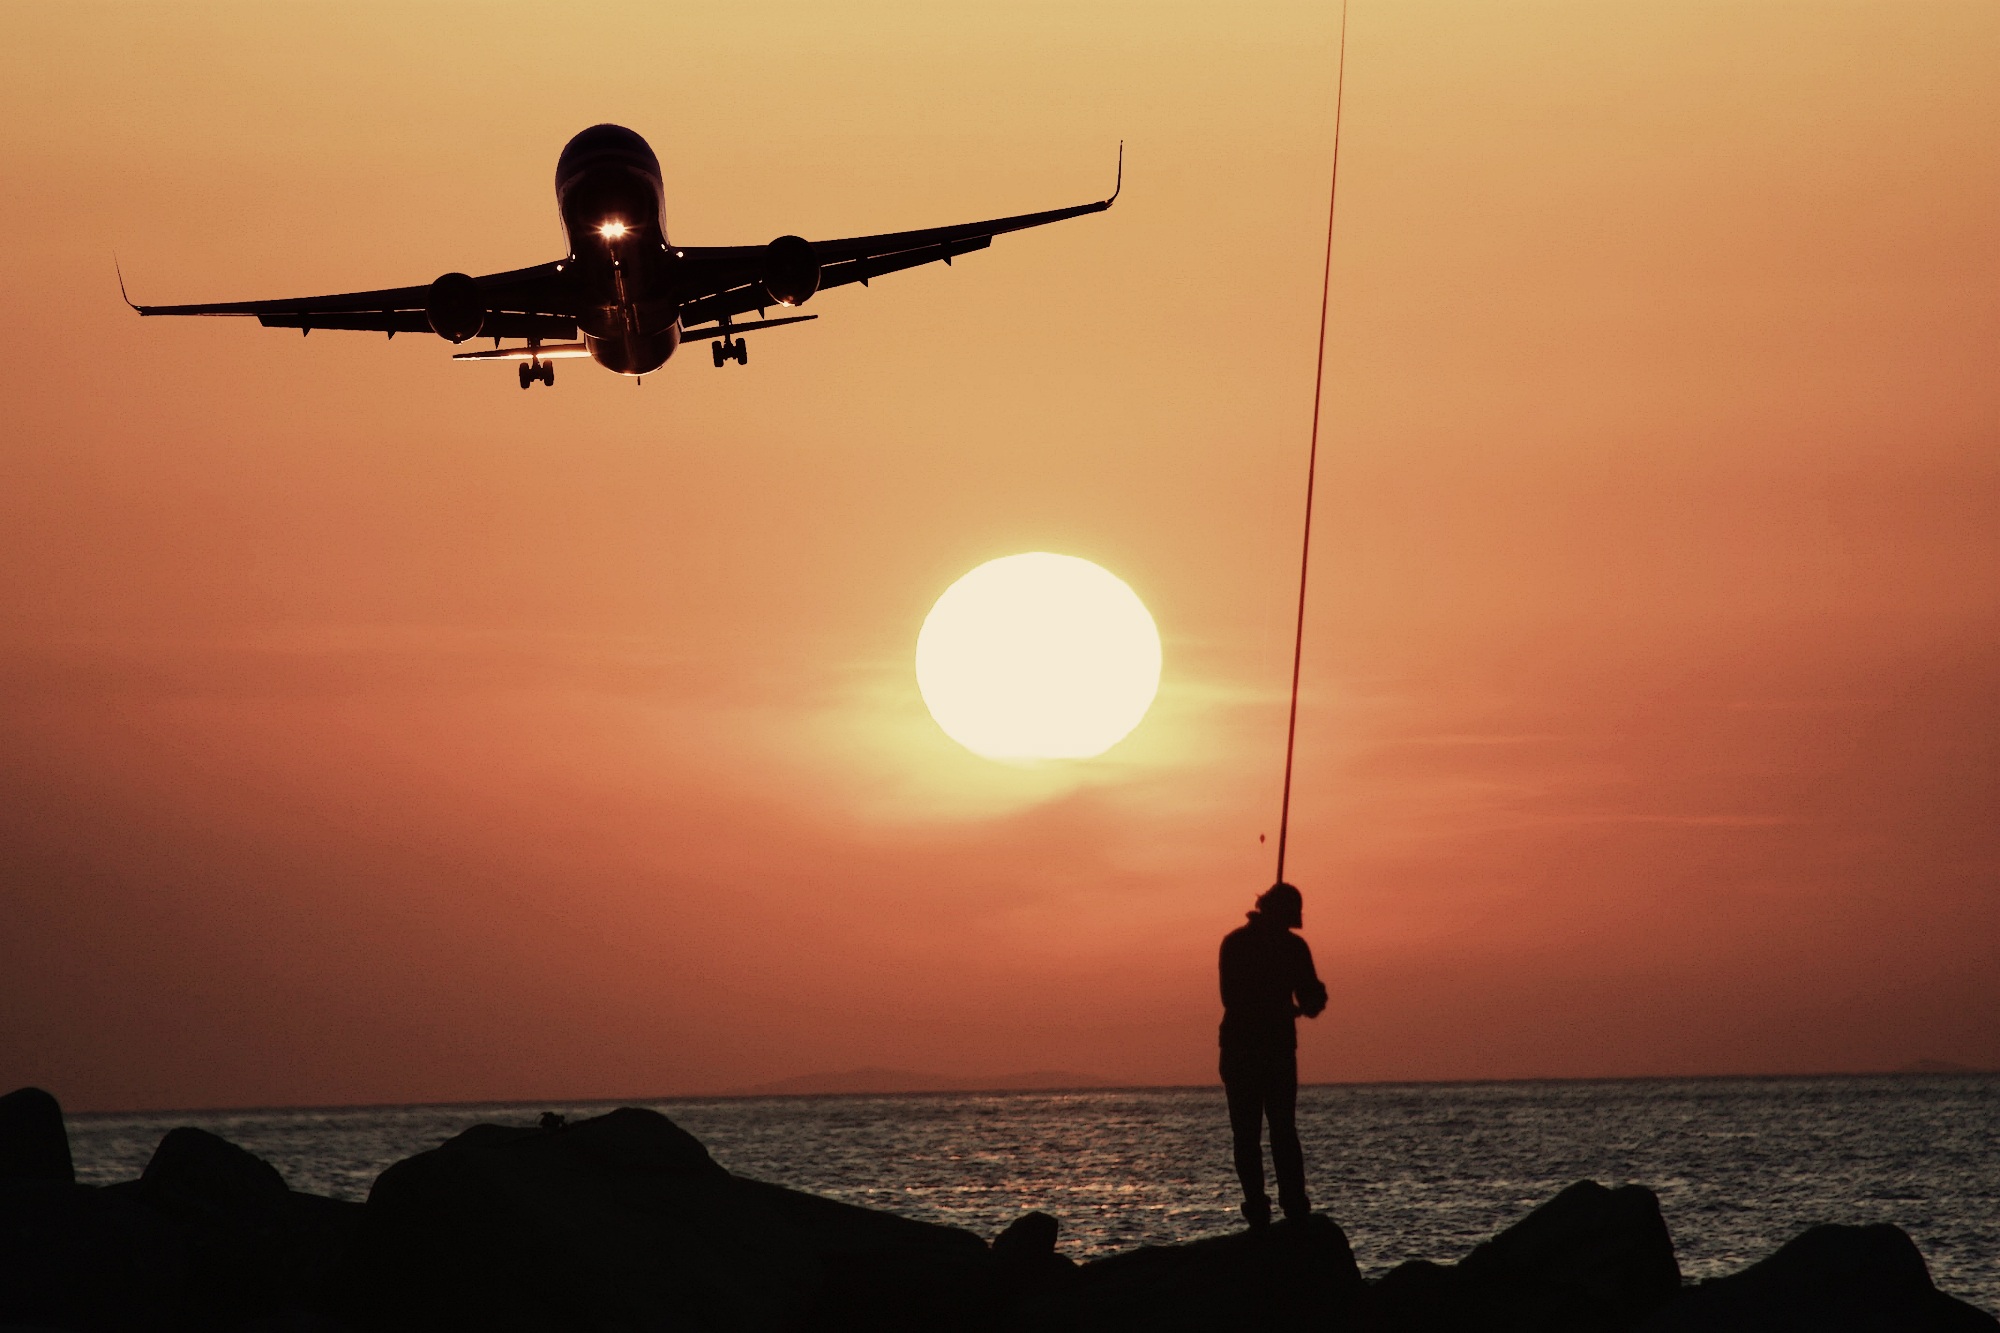 fishing, photography, fisherman, aircraft, evening, horizon, silhouette, sport, sunset wallpapers for tablet